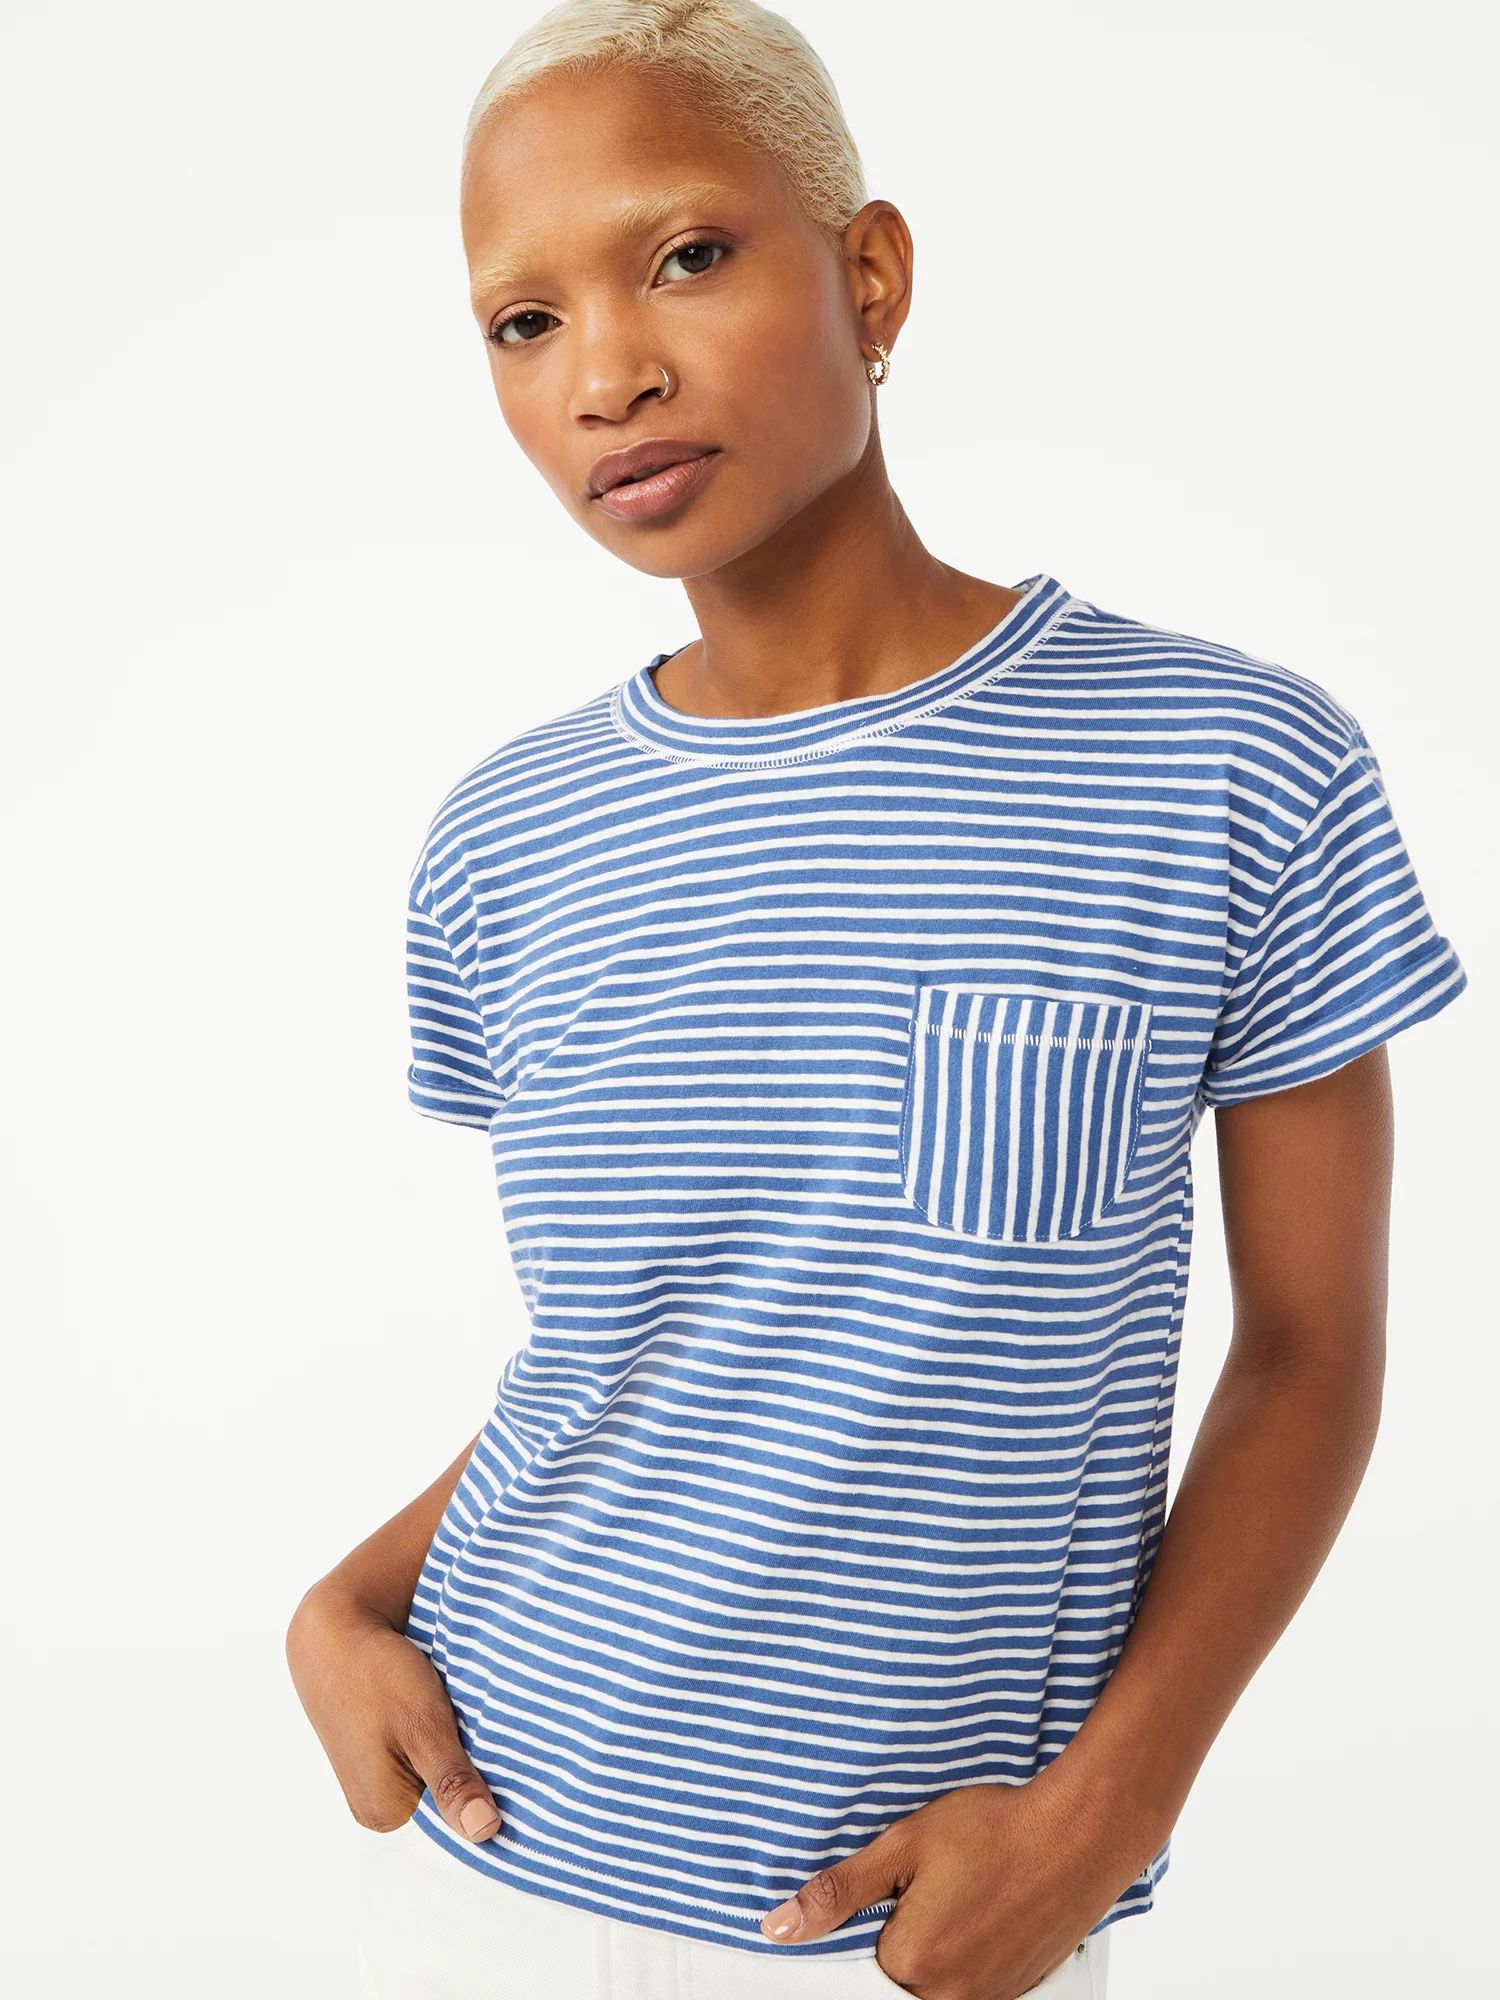 Free Assembly Women's Pocket T-Shirt with Cuffed Short Sleeves | Walmart (US)